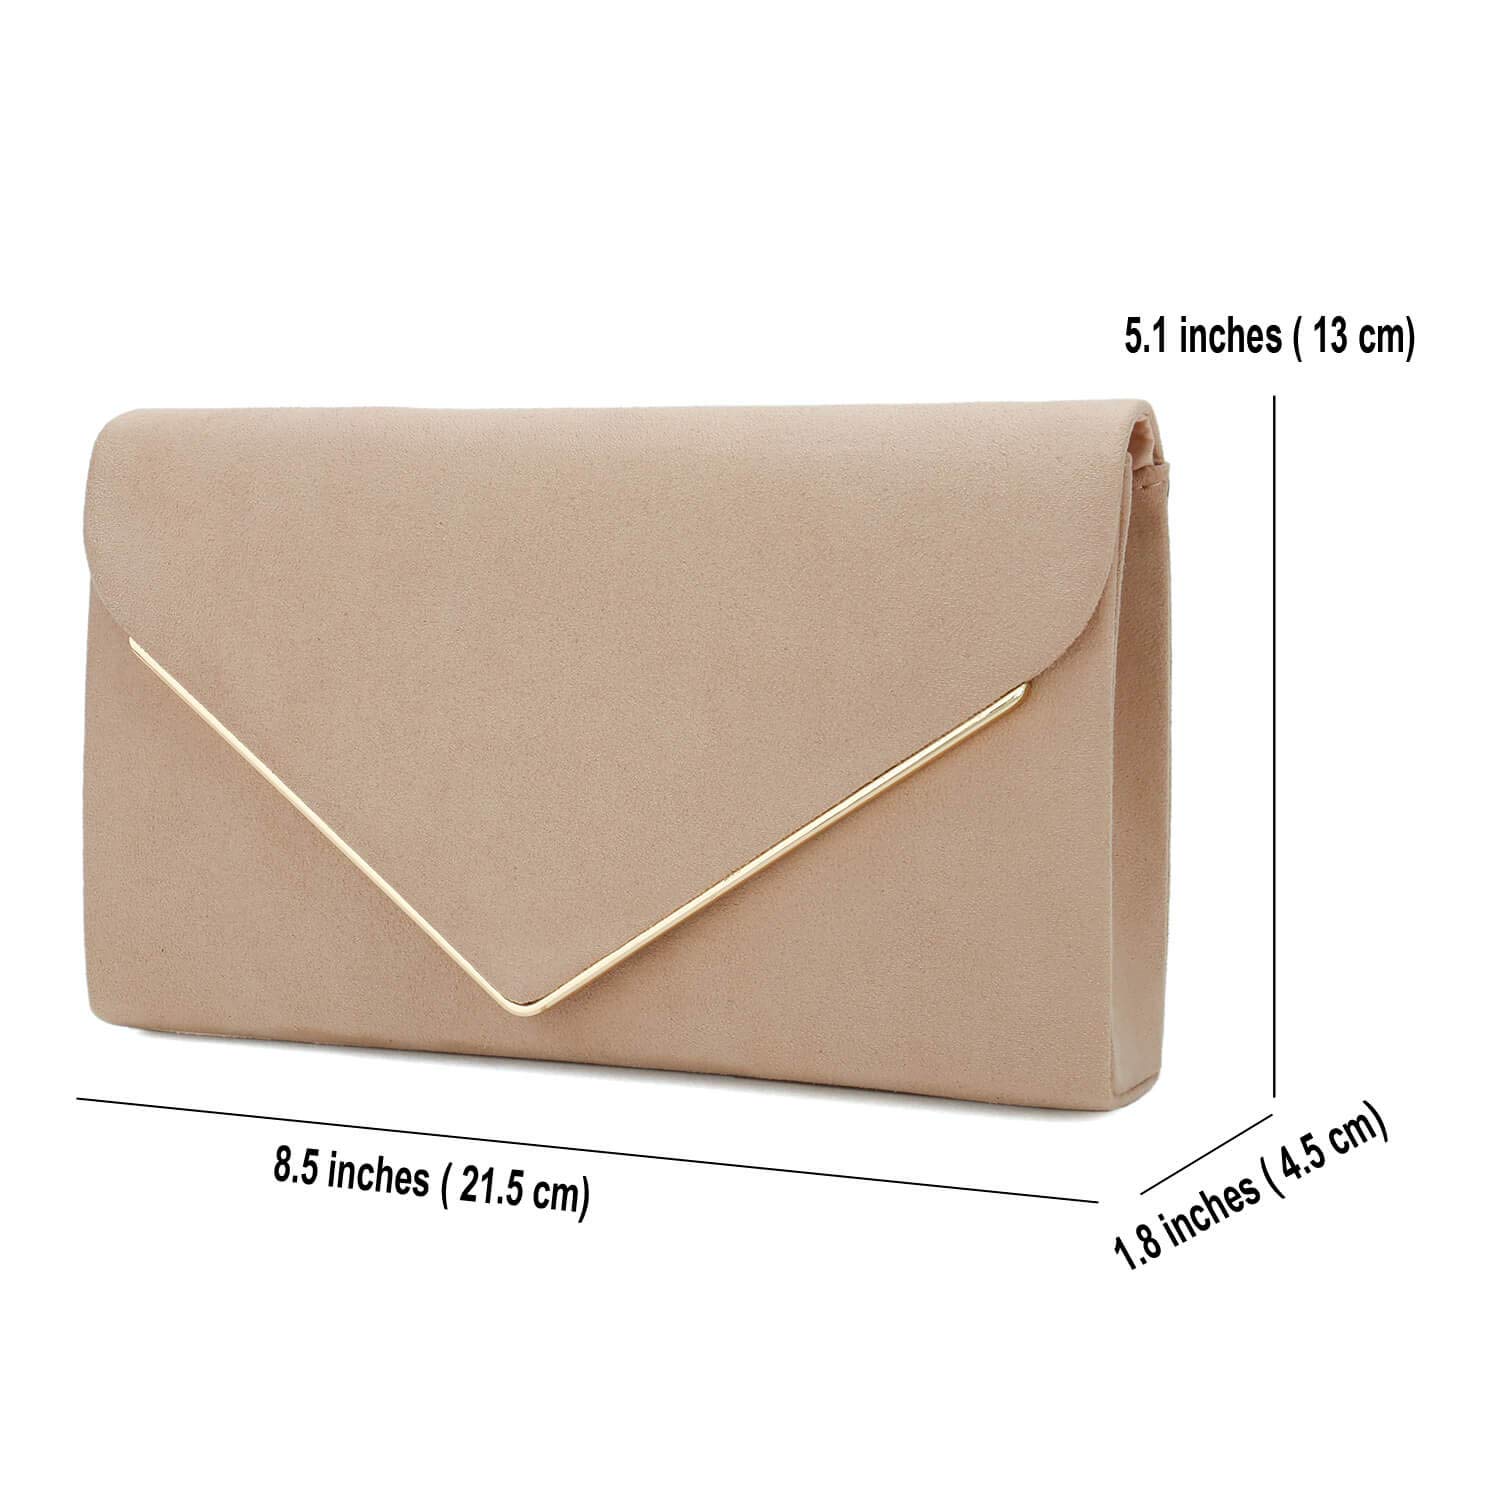 CHARMING TAILOR Faux Suede Clutch Bag Elegant Metal Binding Evening Purse for Wedding/Prom/Black-Tie Events